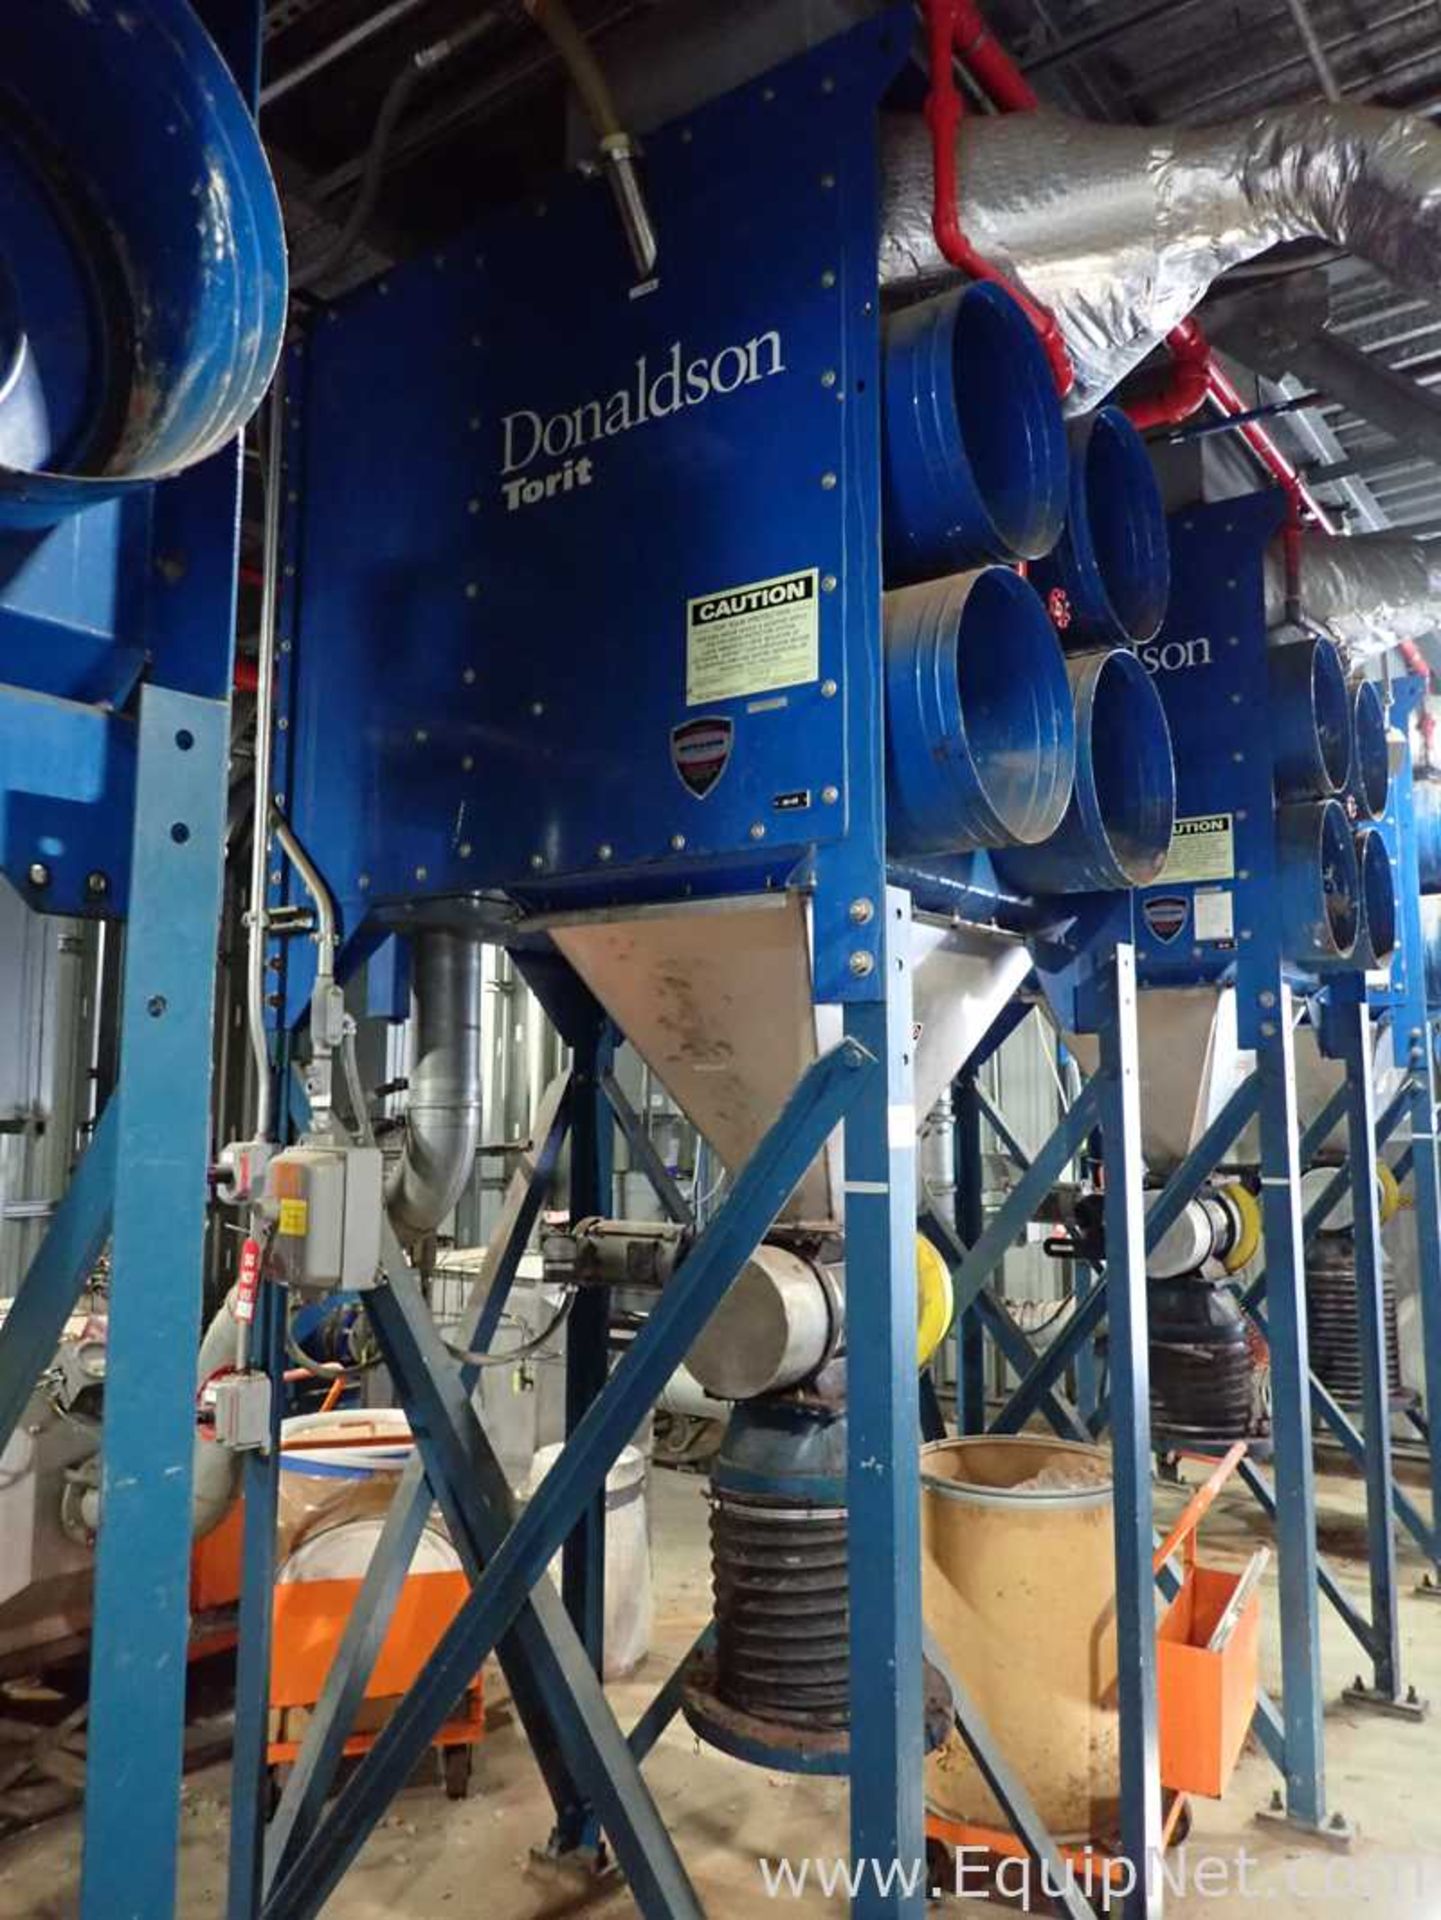 Donaldson Torit DFT 2-4 Dust Collector System - Image 2 of 11